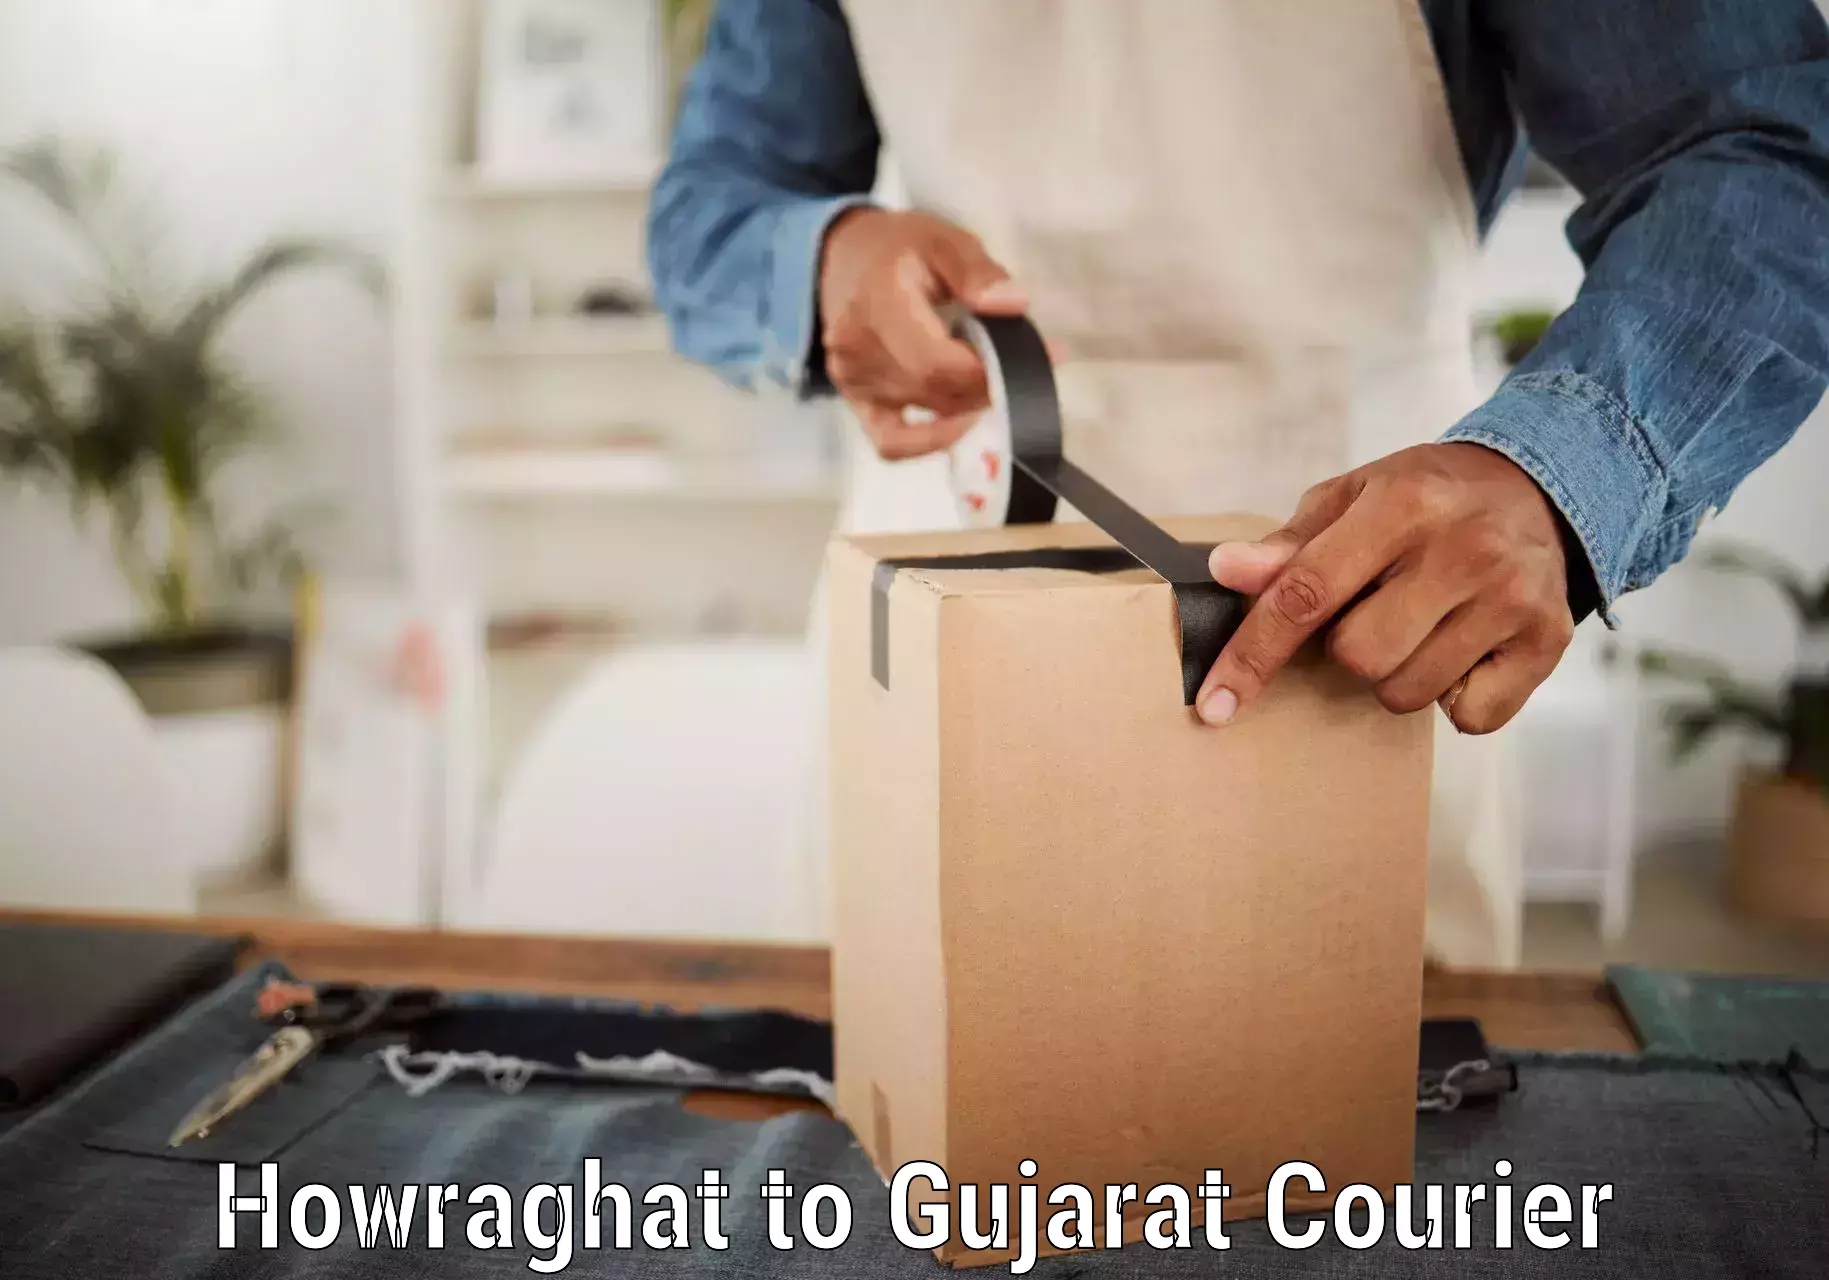 Full-service courier options Howraghat to Dahod